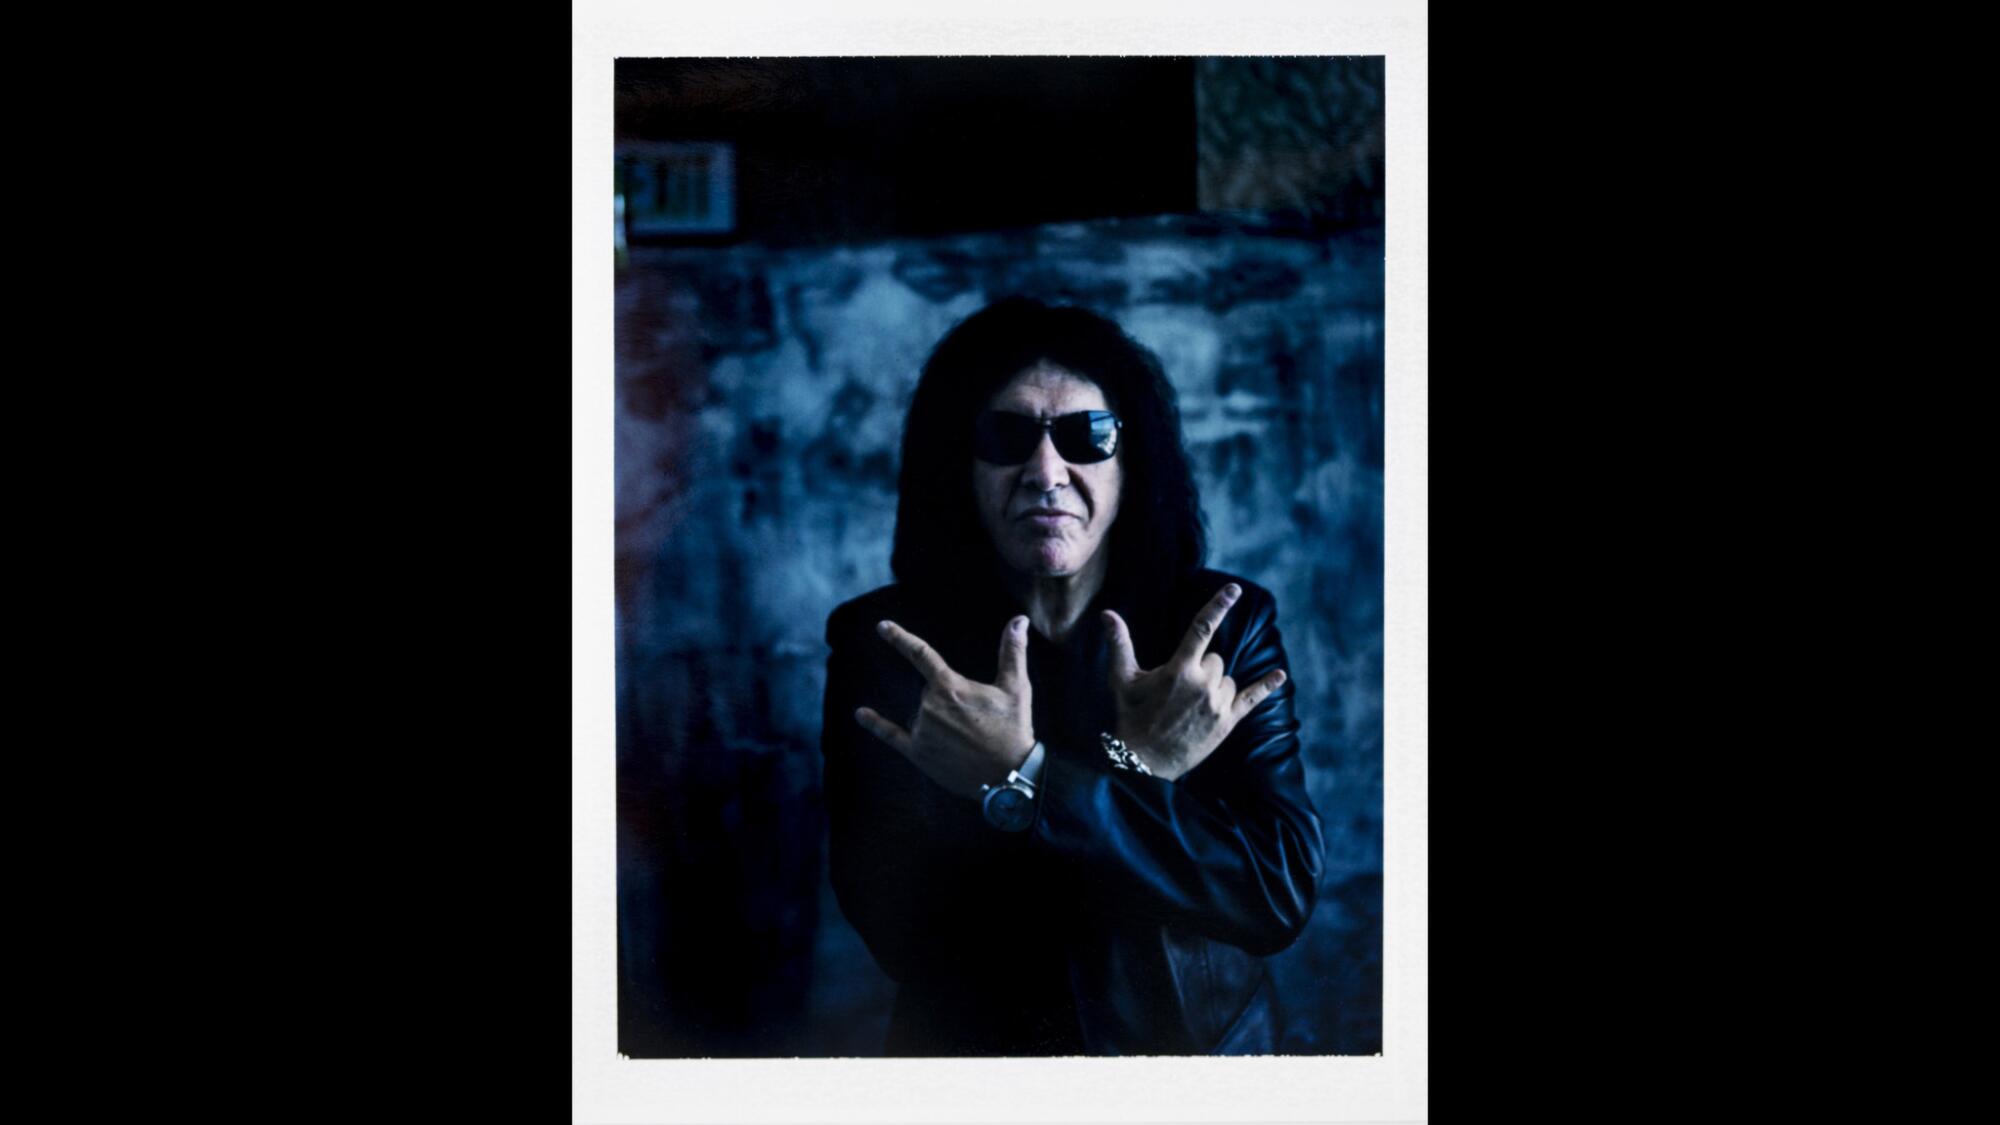 Gene Simmons of KISS photographed at Comic-Con 2015 in San Diego